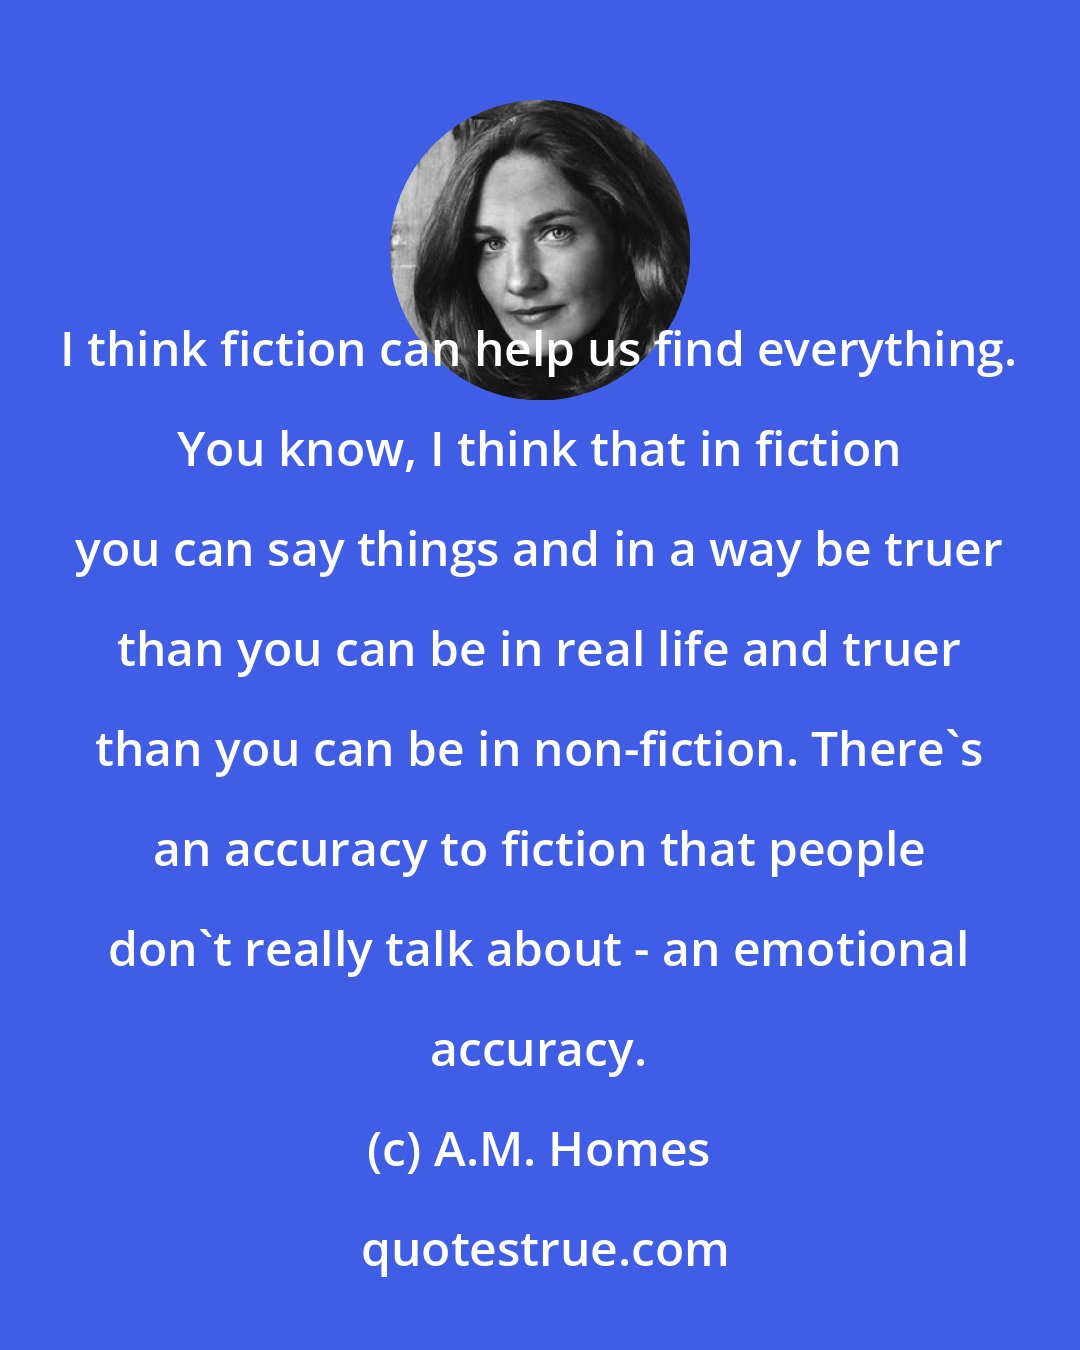 A.M. Homes: I think fiction can help us find everything. You know, I think that in fiction you can say things and in a way be truer than you can be in real life and truer than you can be in non-fiction. There's an accuracy to fiction that people don't really talk about - an emotional accuracy.